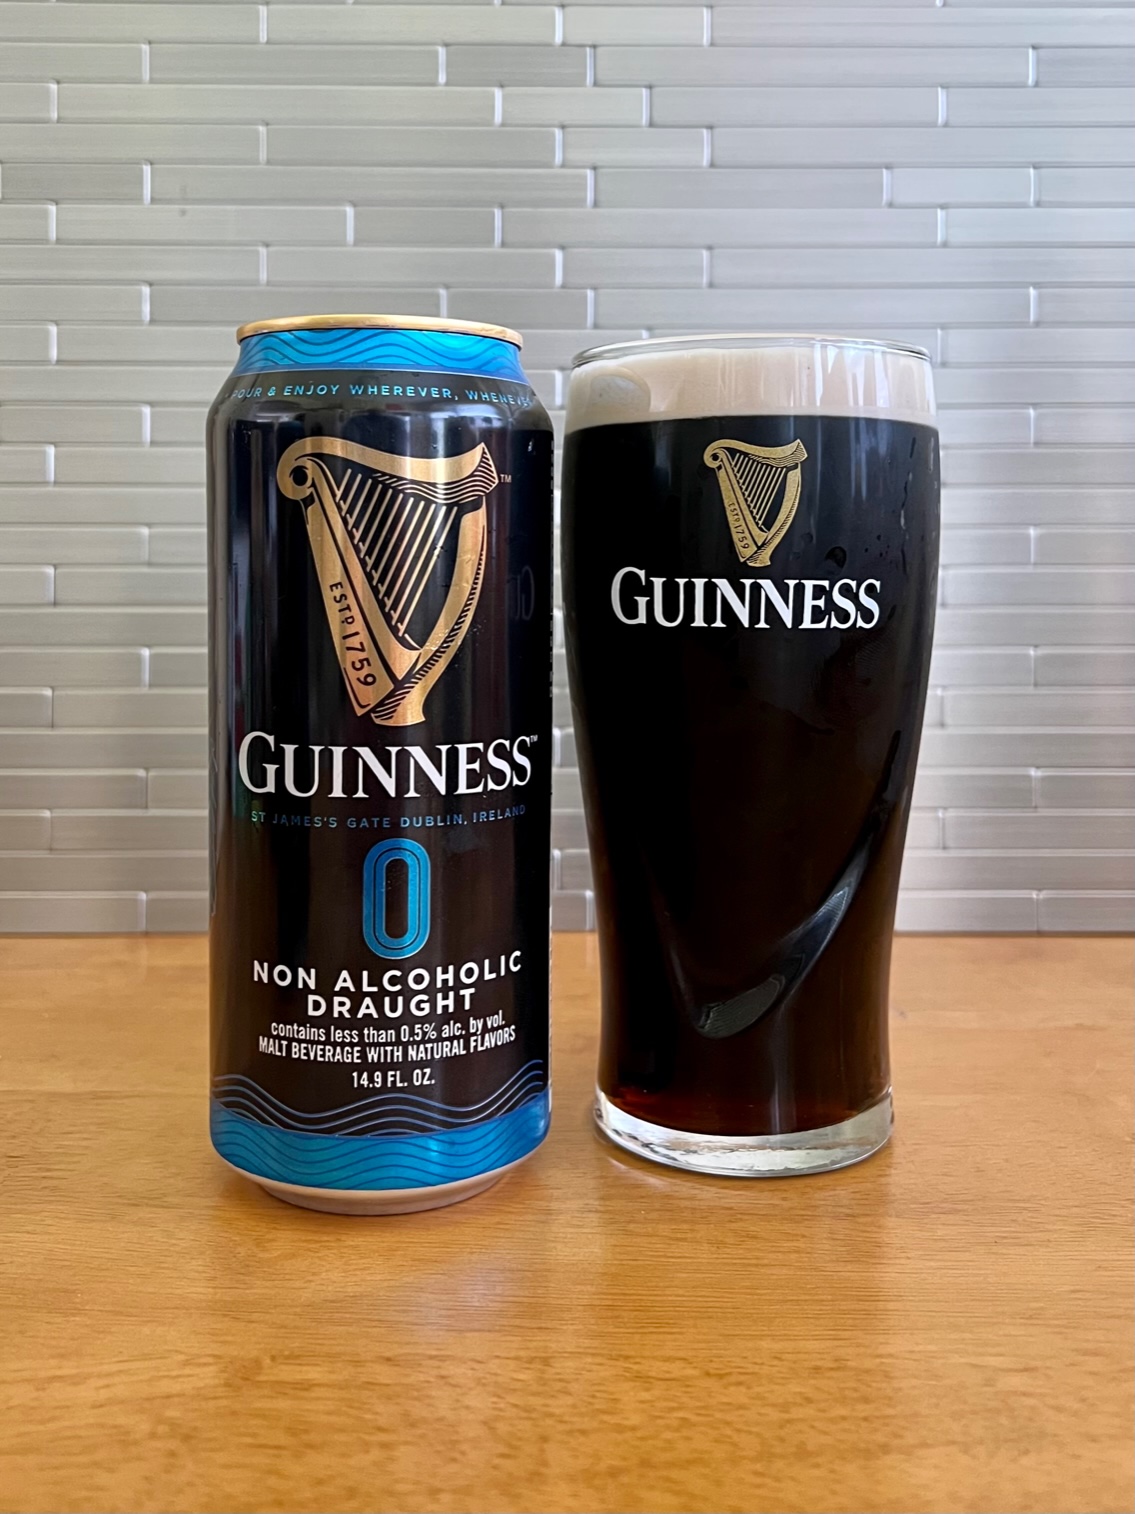 guinness-0-0-non-alcoholic-stout-is-now-available-in-the-united-states